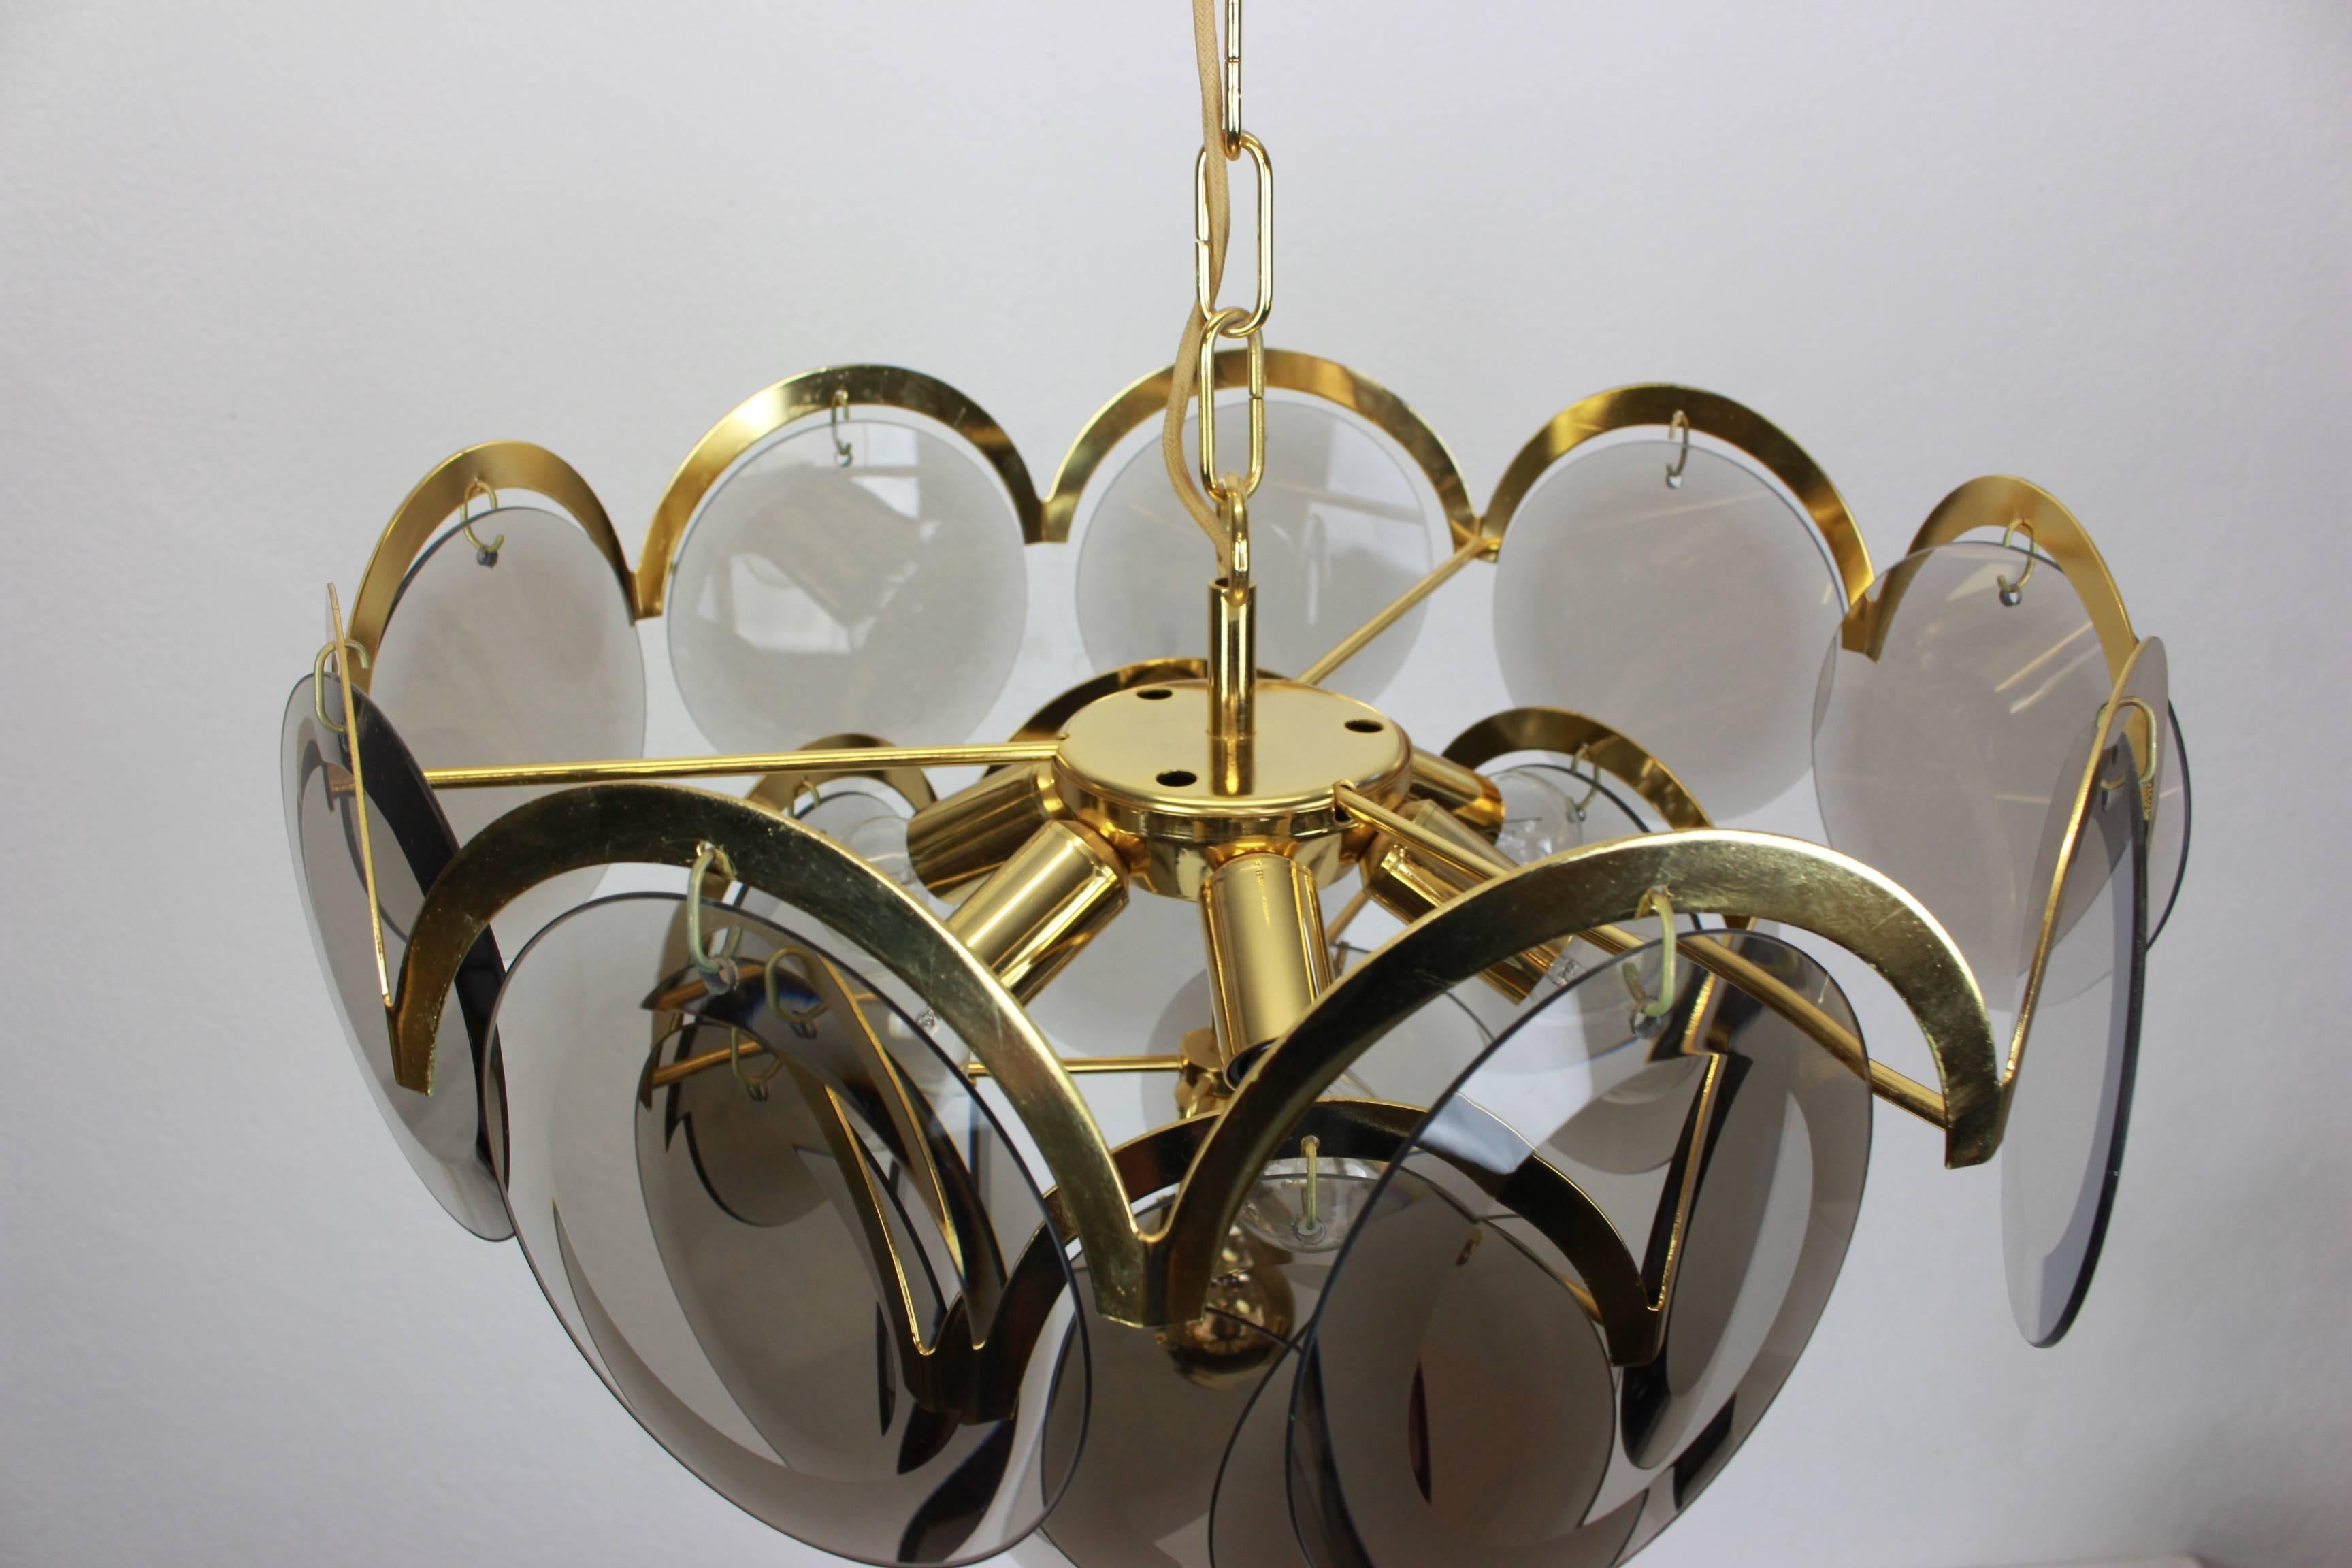 A stunning four-tier chandelier by Vistosi, Italy, manufactured in, circa 1960-1969
High quality and in very good condition. Cleaned, well-wired and ready to use. 
The fixture requires 7 x E14 Standard bulbs with 40W max each and compatible with